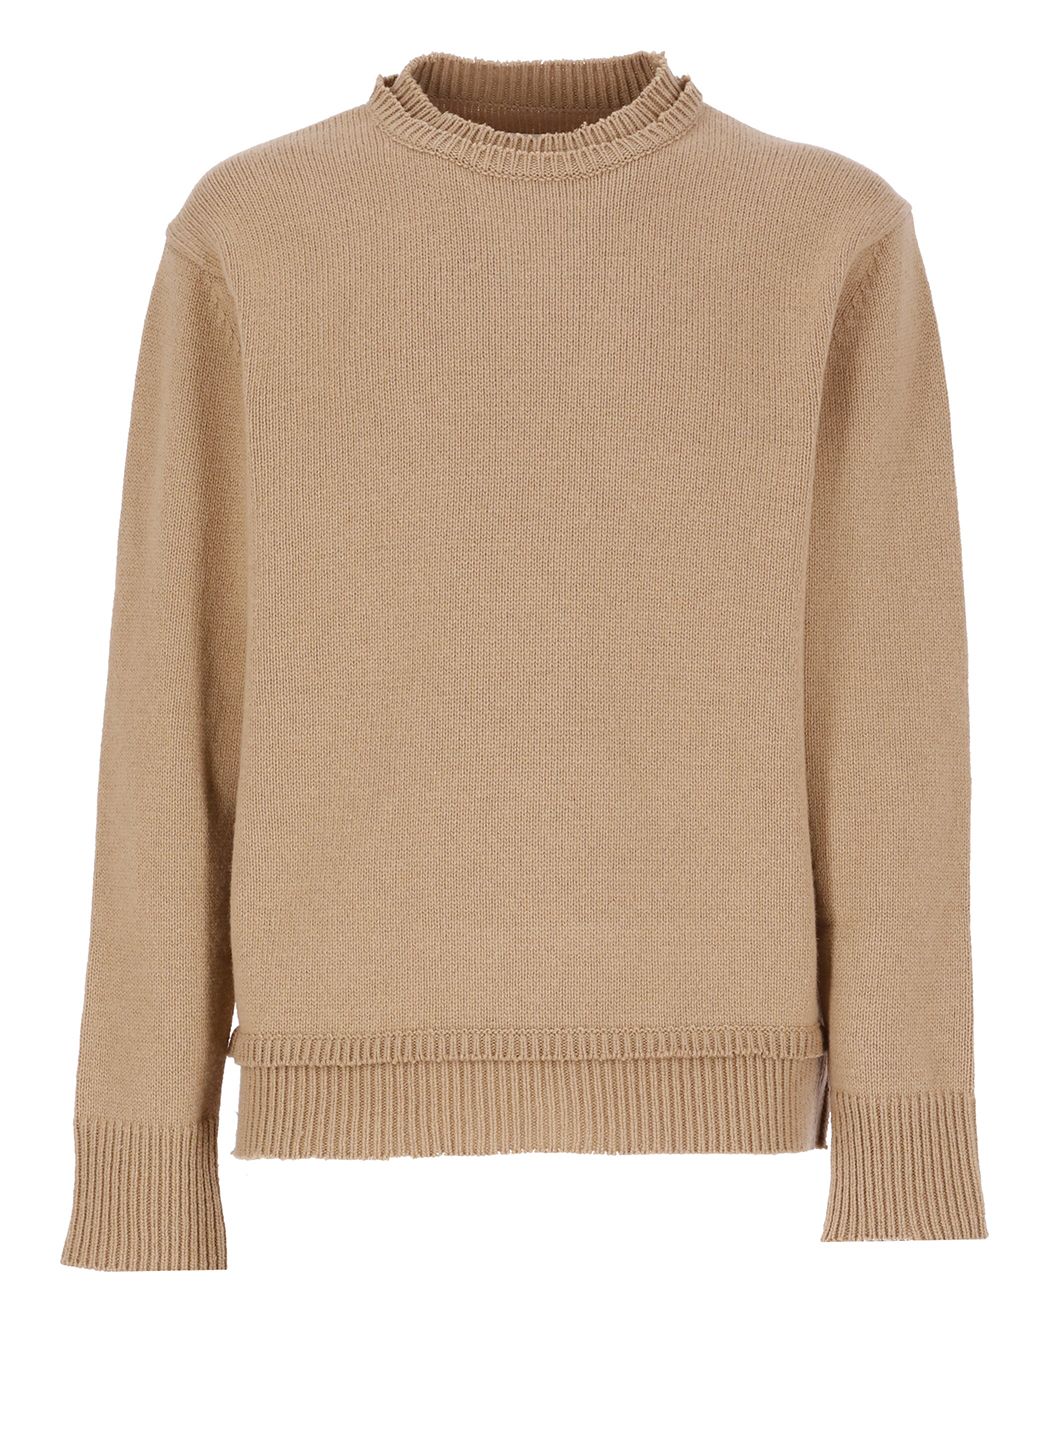 Wool, linen and cotton sweater